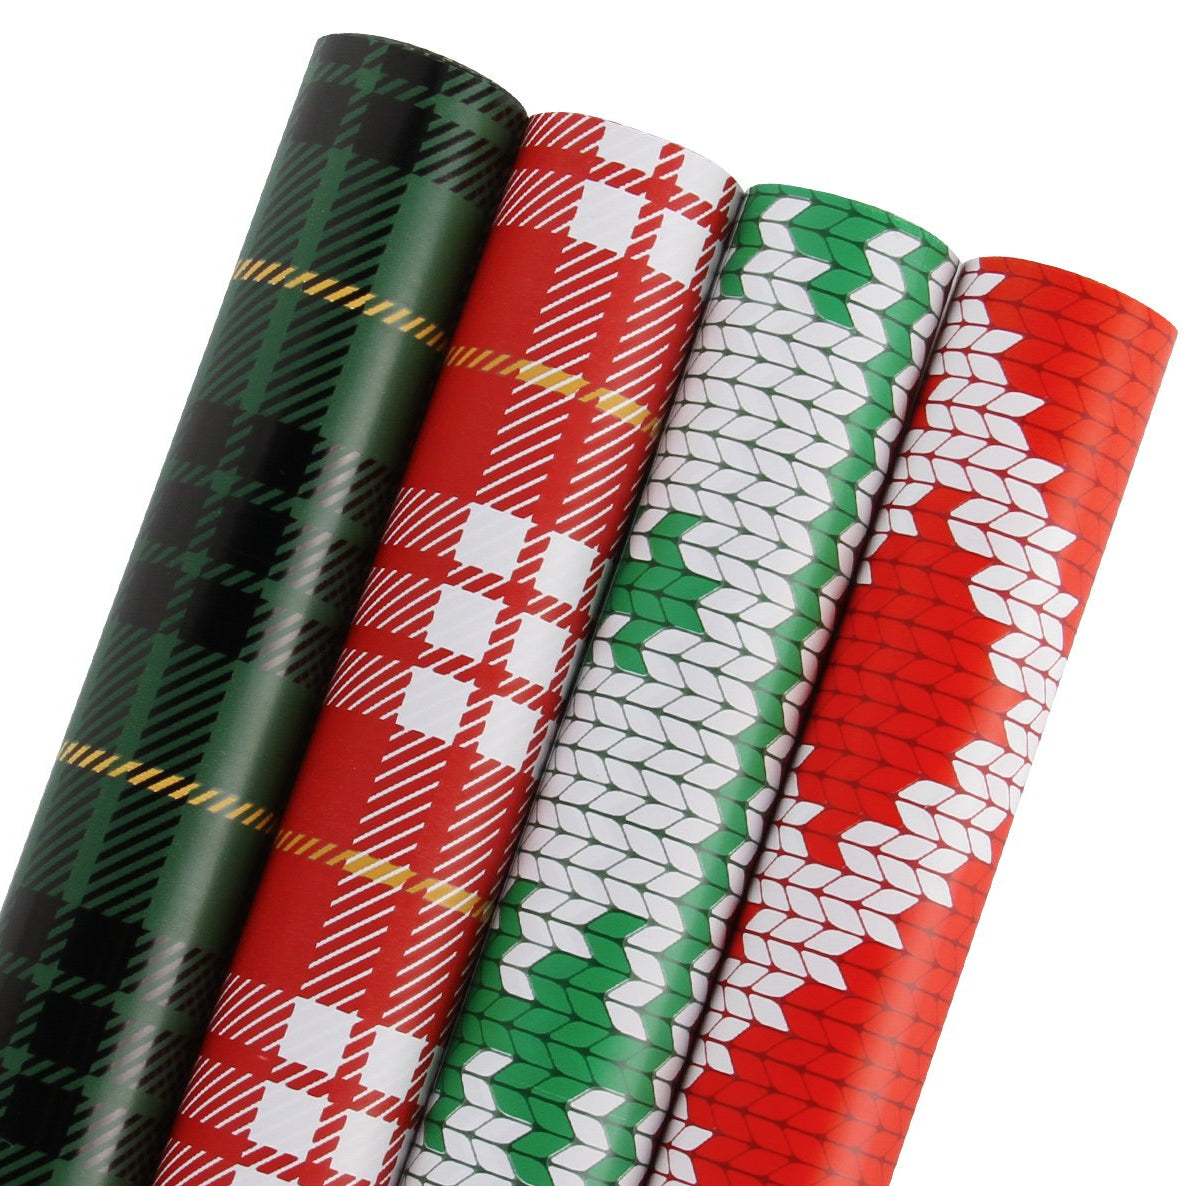 Green & Dark Red Wrapping Paper